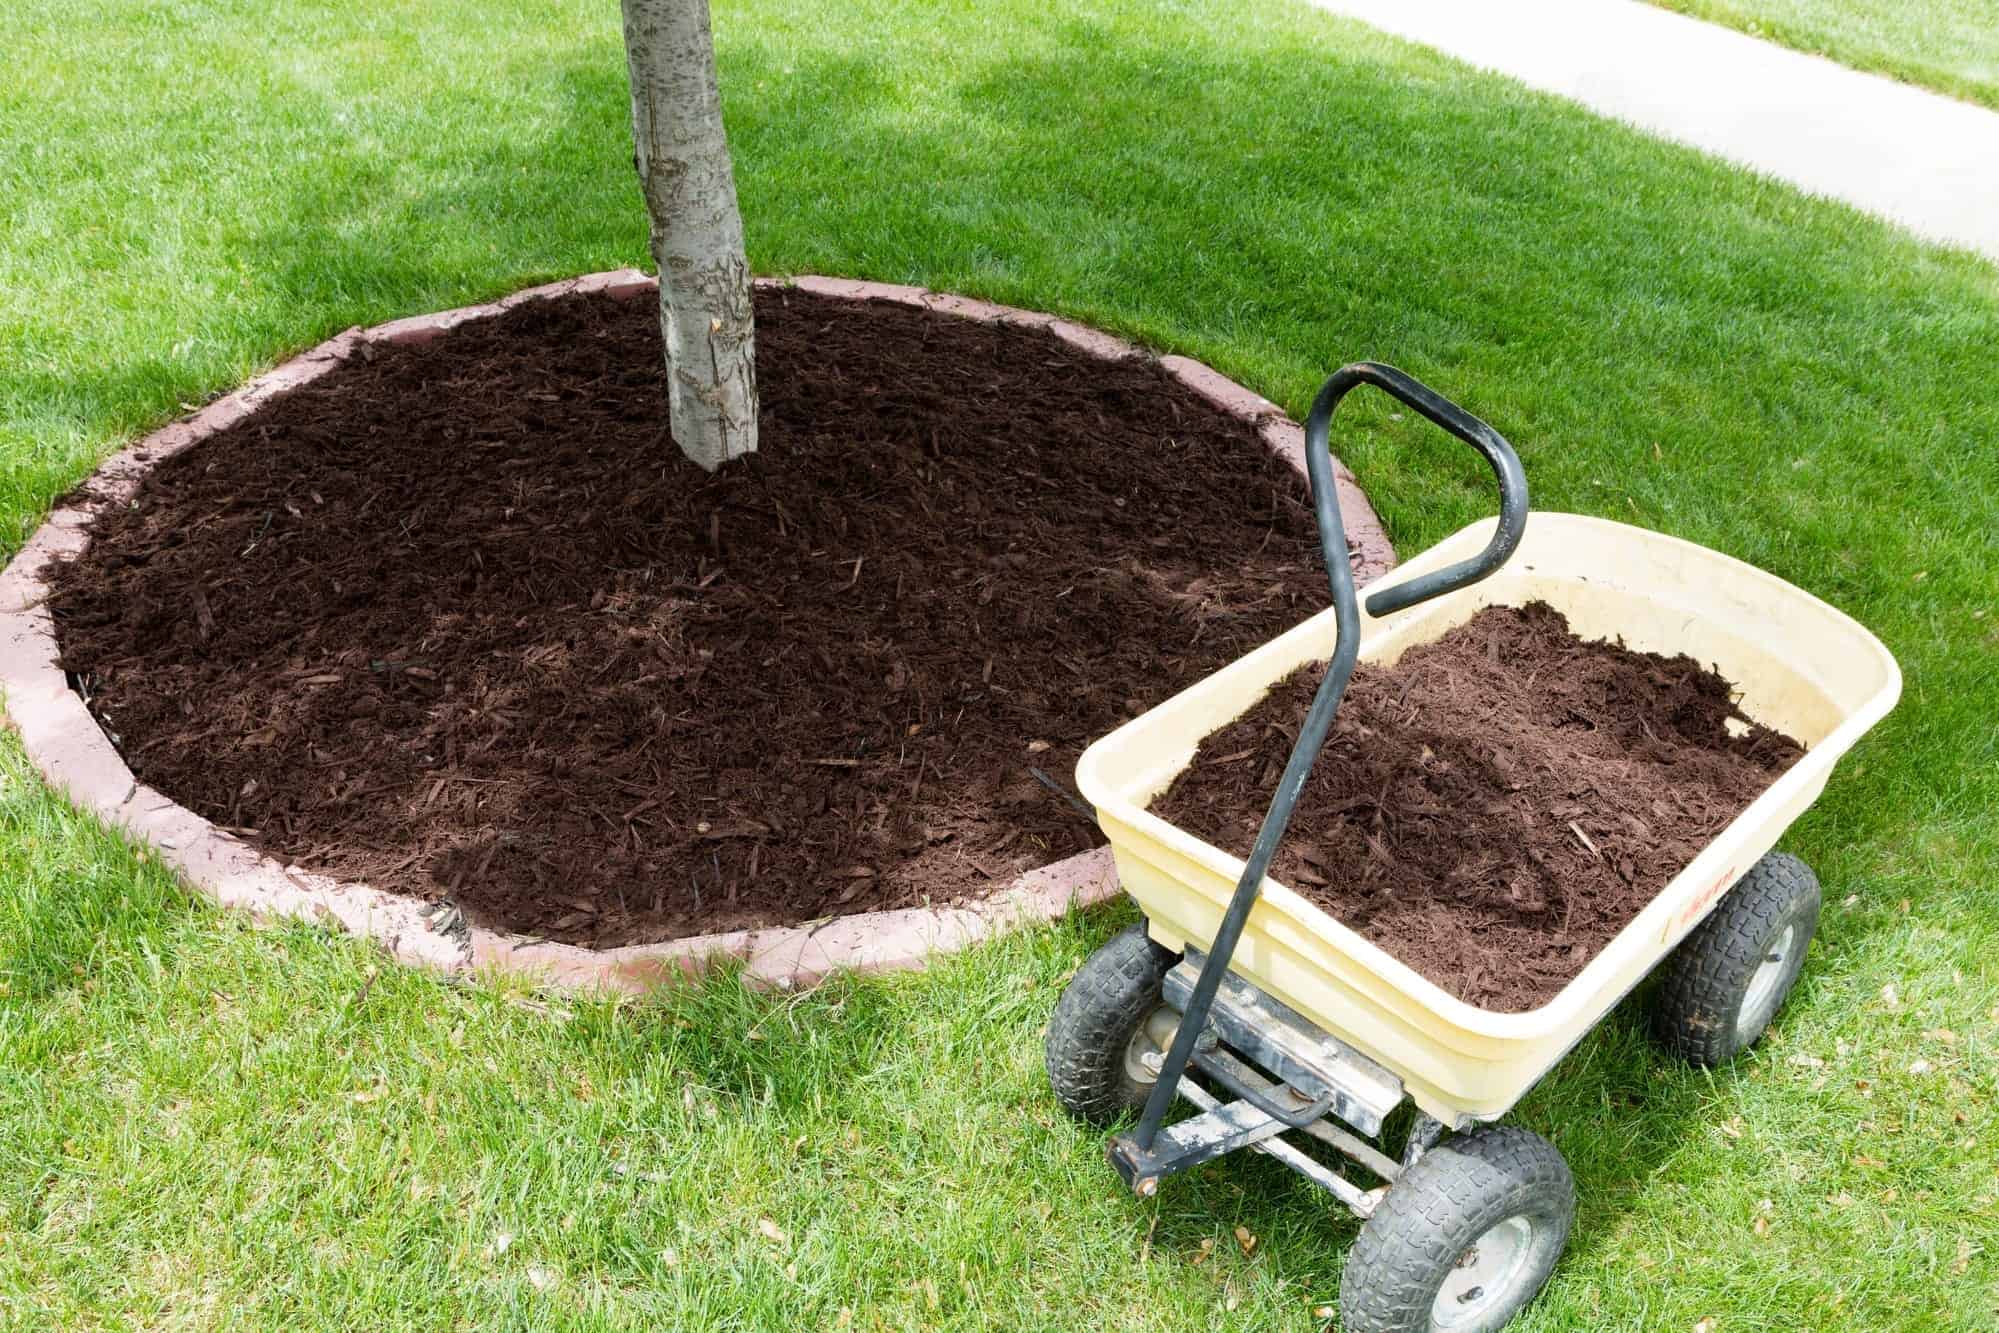 How to mulch a tree